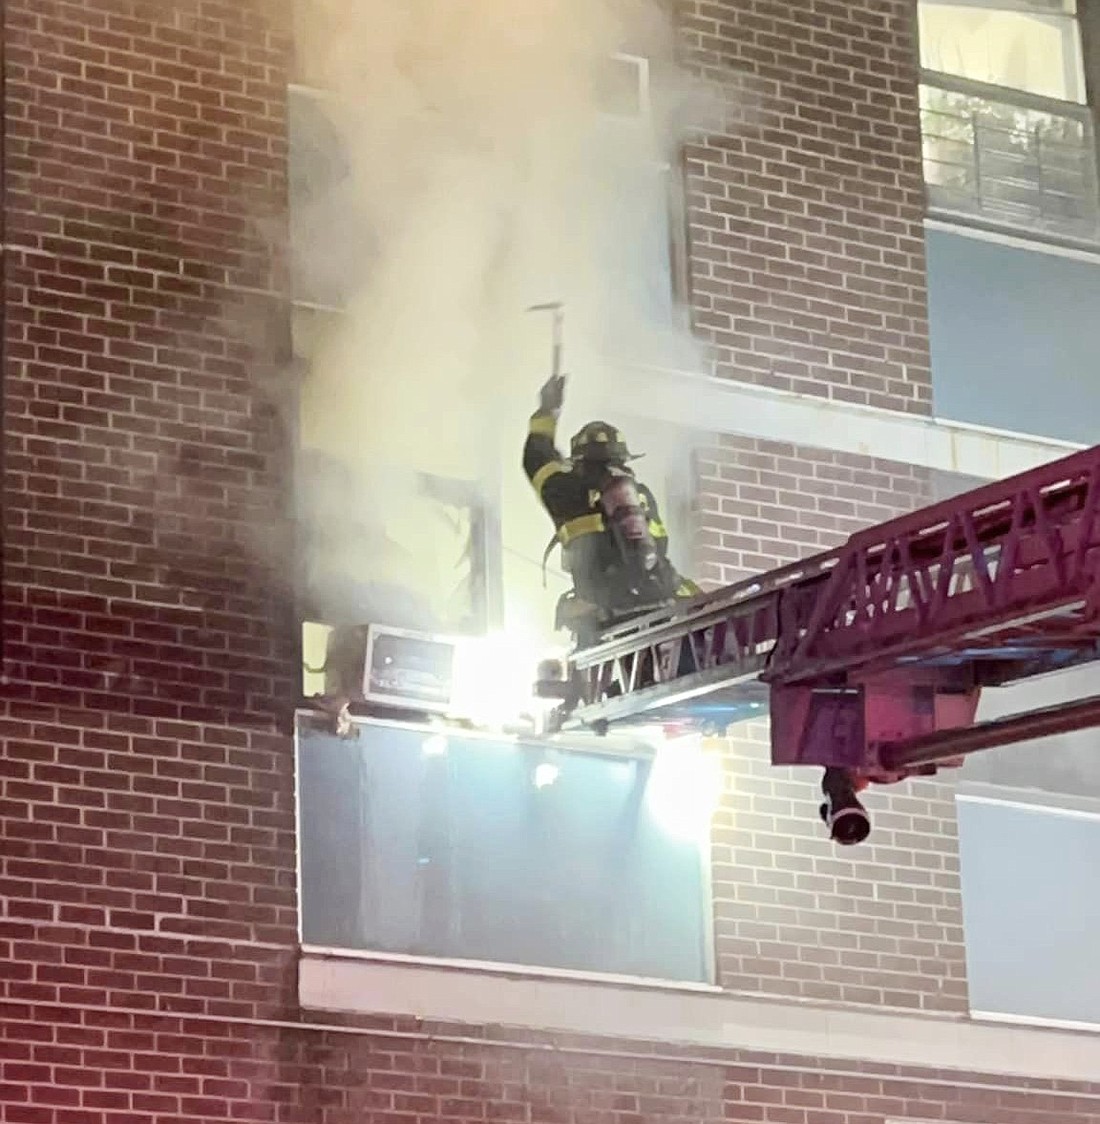 A member of the Port Chester Fire Department uses a tool to forcibly gain entry into a second-floor apartment at 167 Terrace Ave. while in the process of fighting a fire on Sunday, Feb. 25.